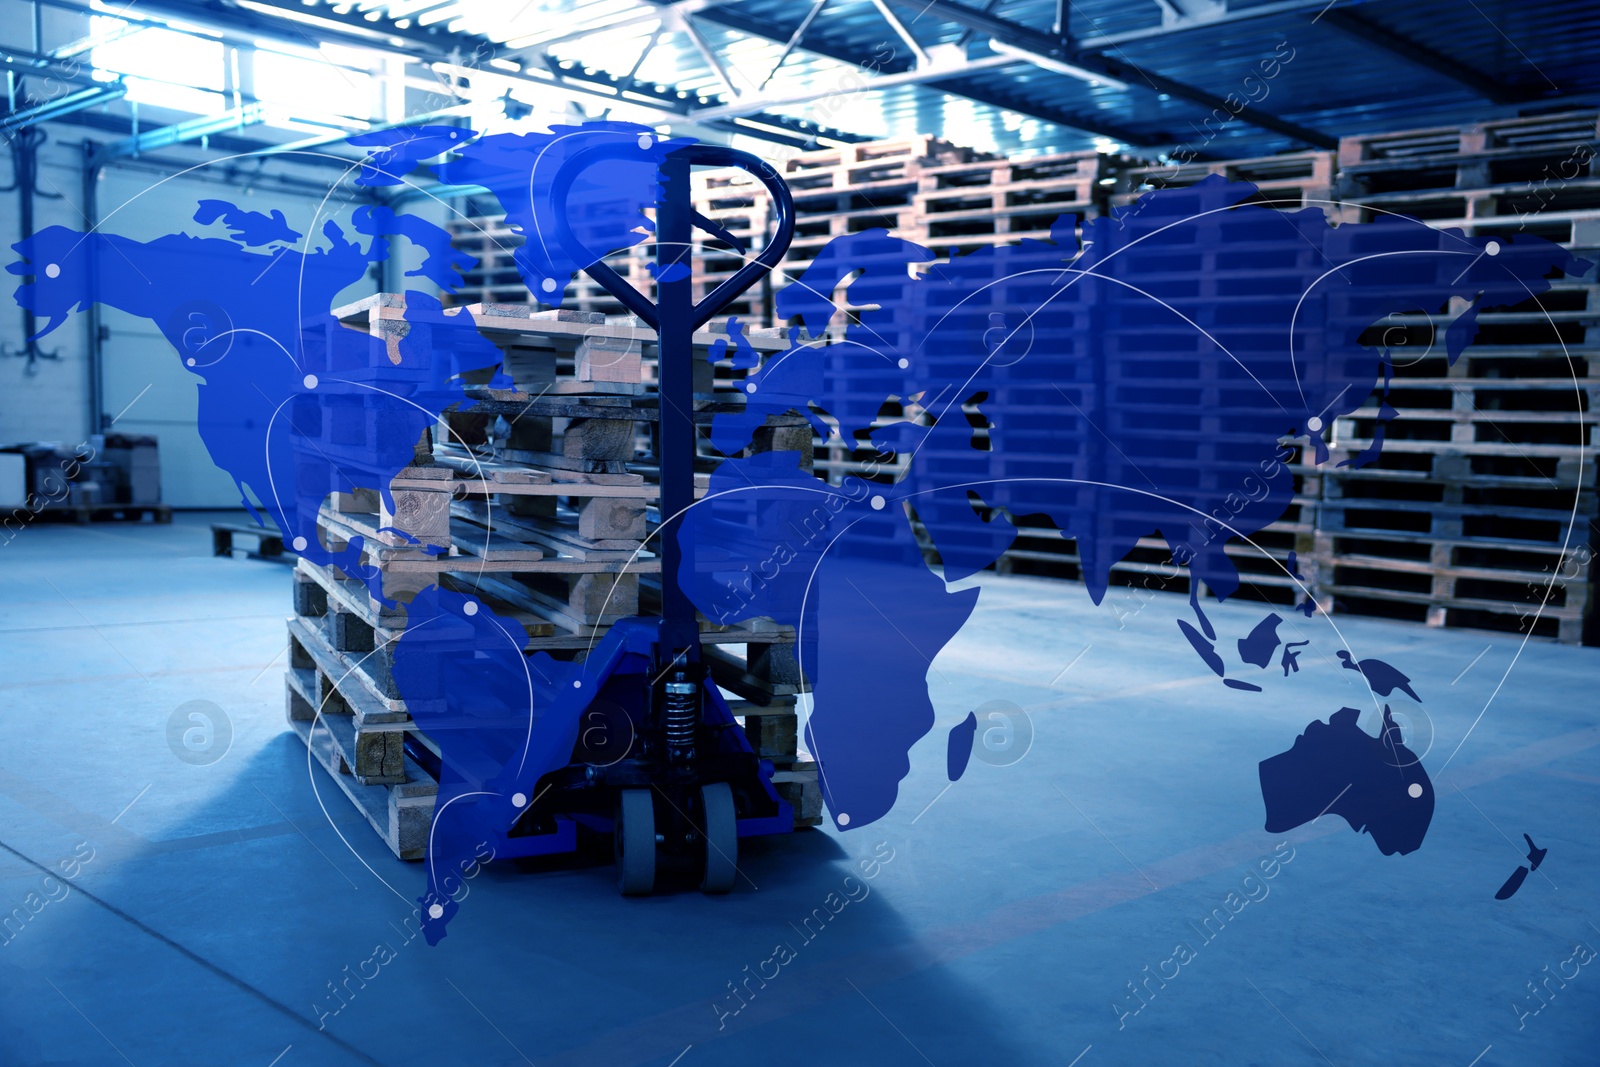 Image of Worldwide logistics. Modern manual forklift with wooden pallets in warehouse and illustration of map